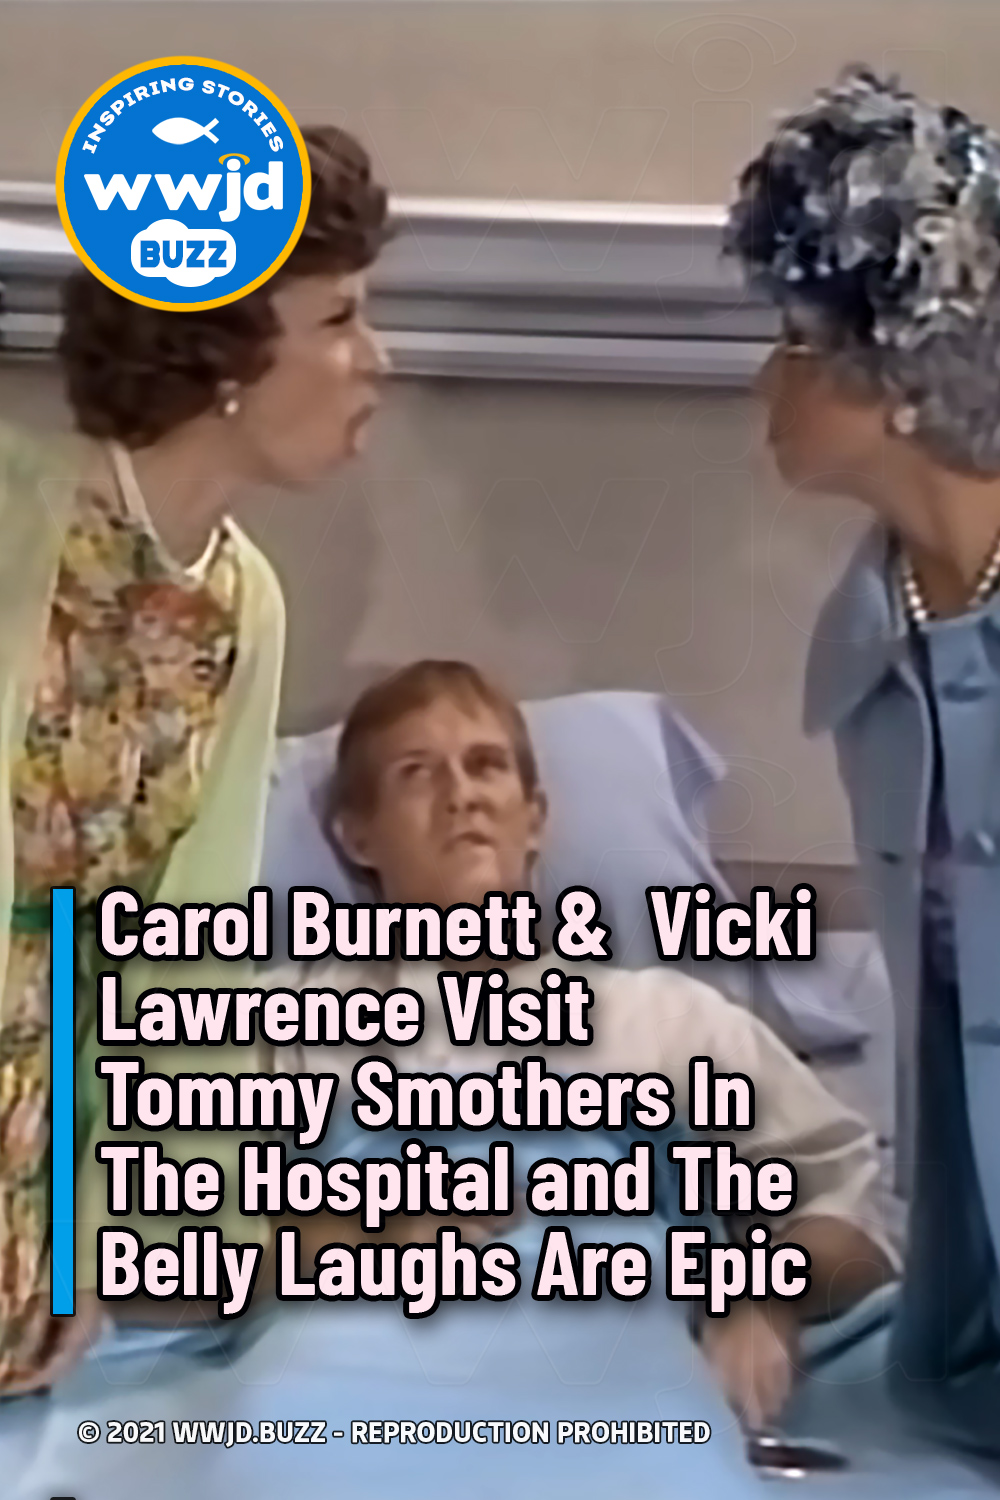 Carol Burnett &  Vicki Lawrence Visit Tommy Smothers In The Hospital and The Belly Laughs Are Epic